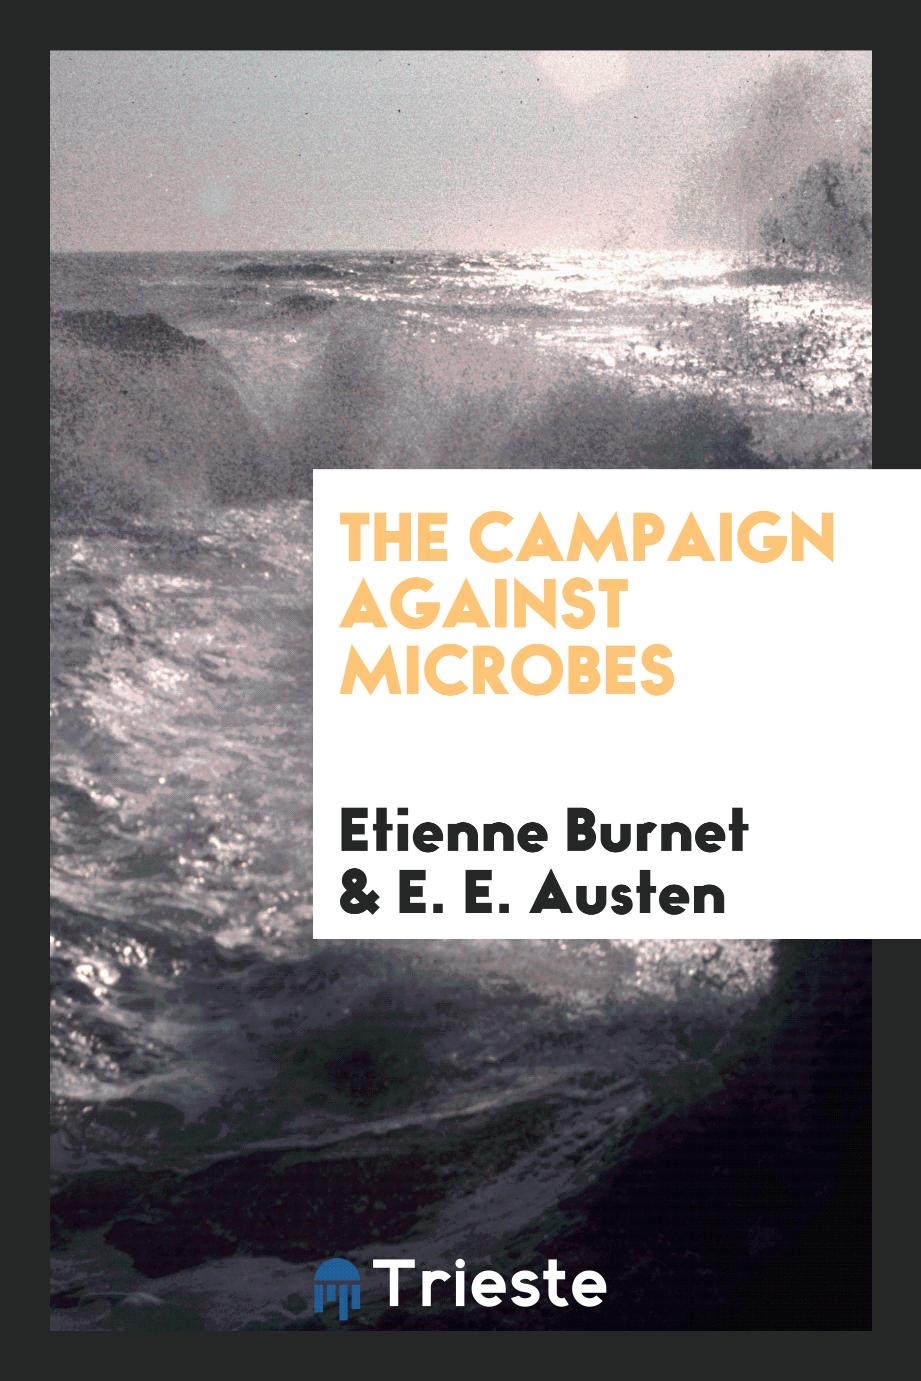 The campaign against microbes